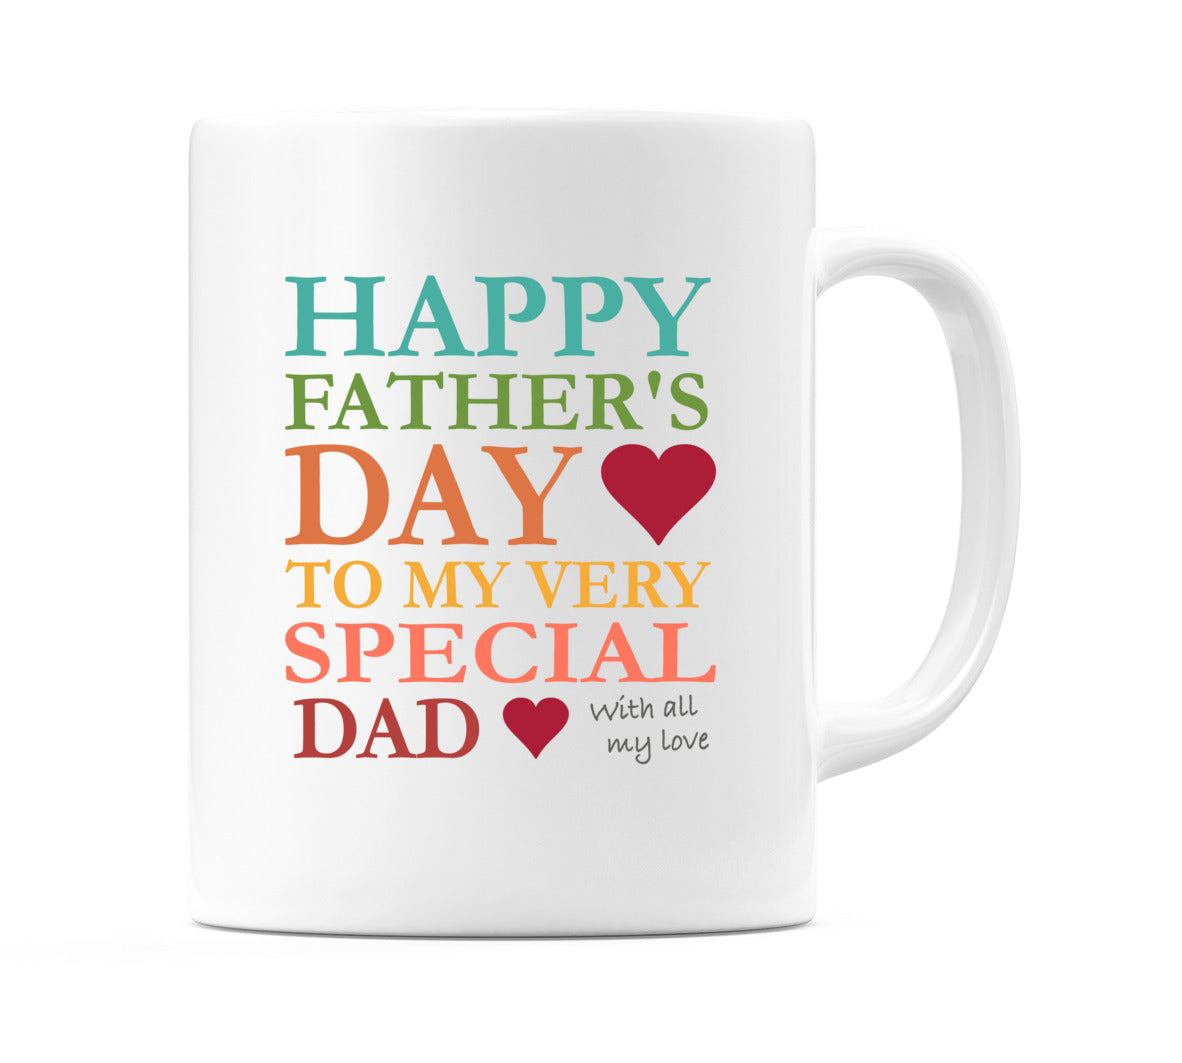 Happy Father's Day To My Very Special Dad With all my love Mug